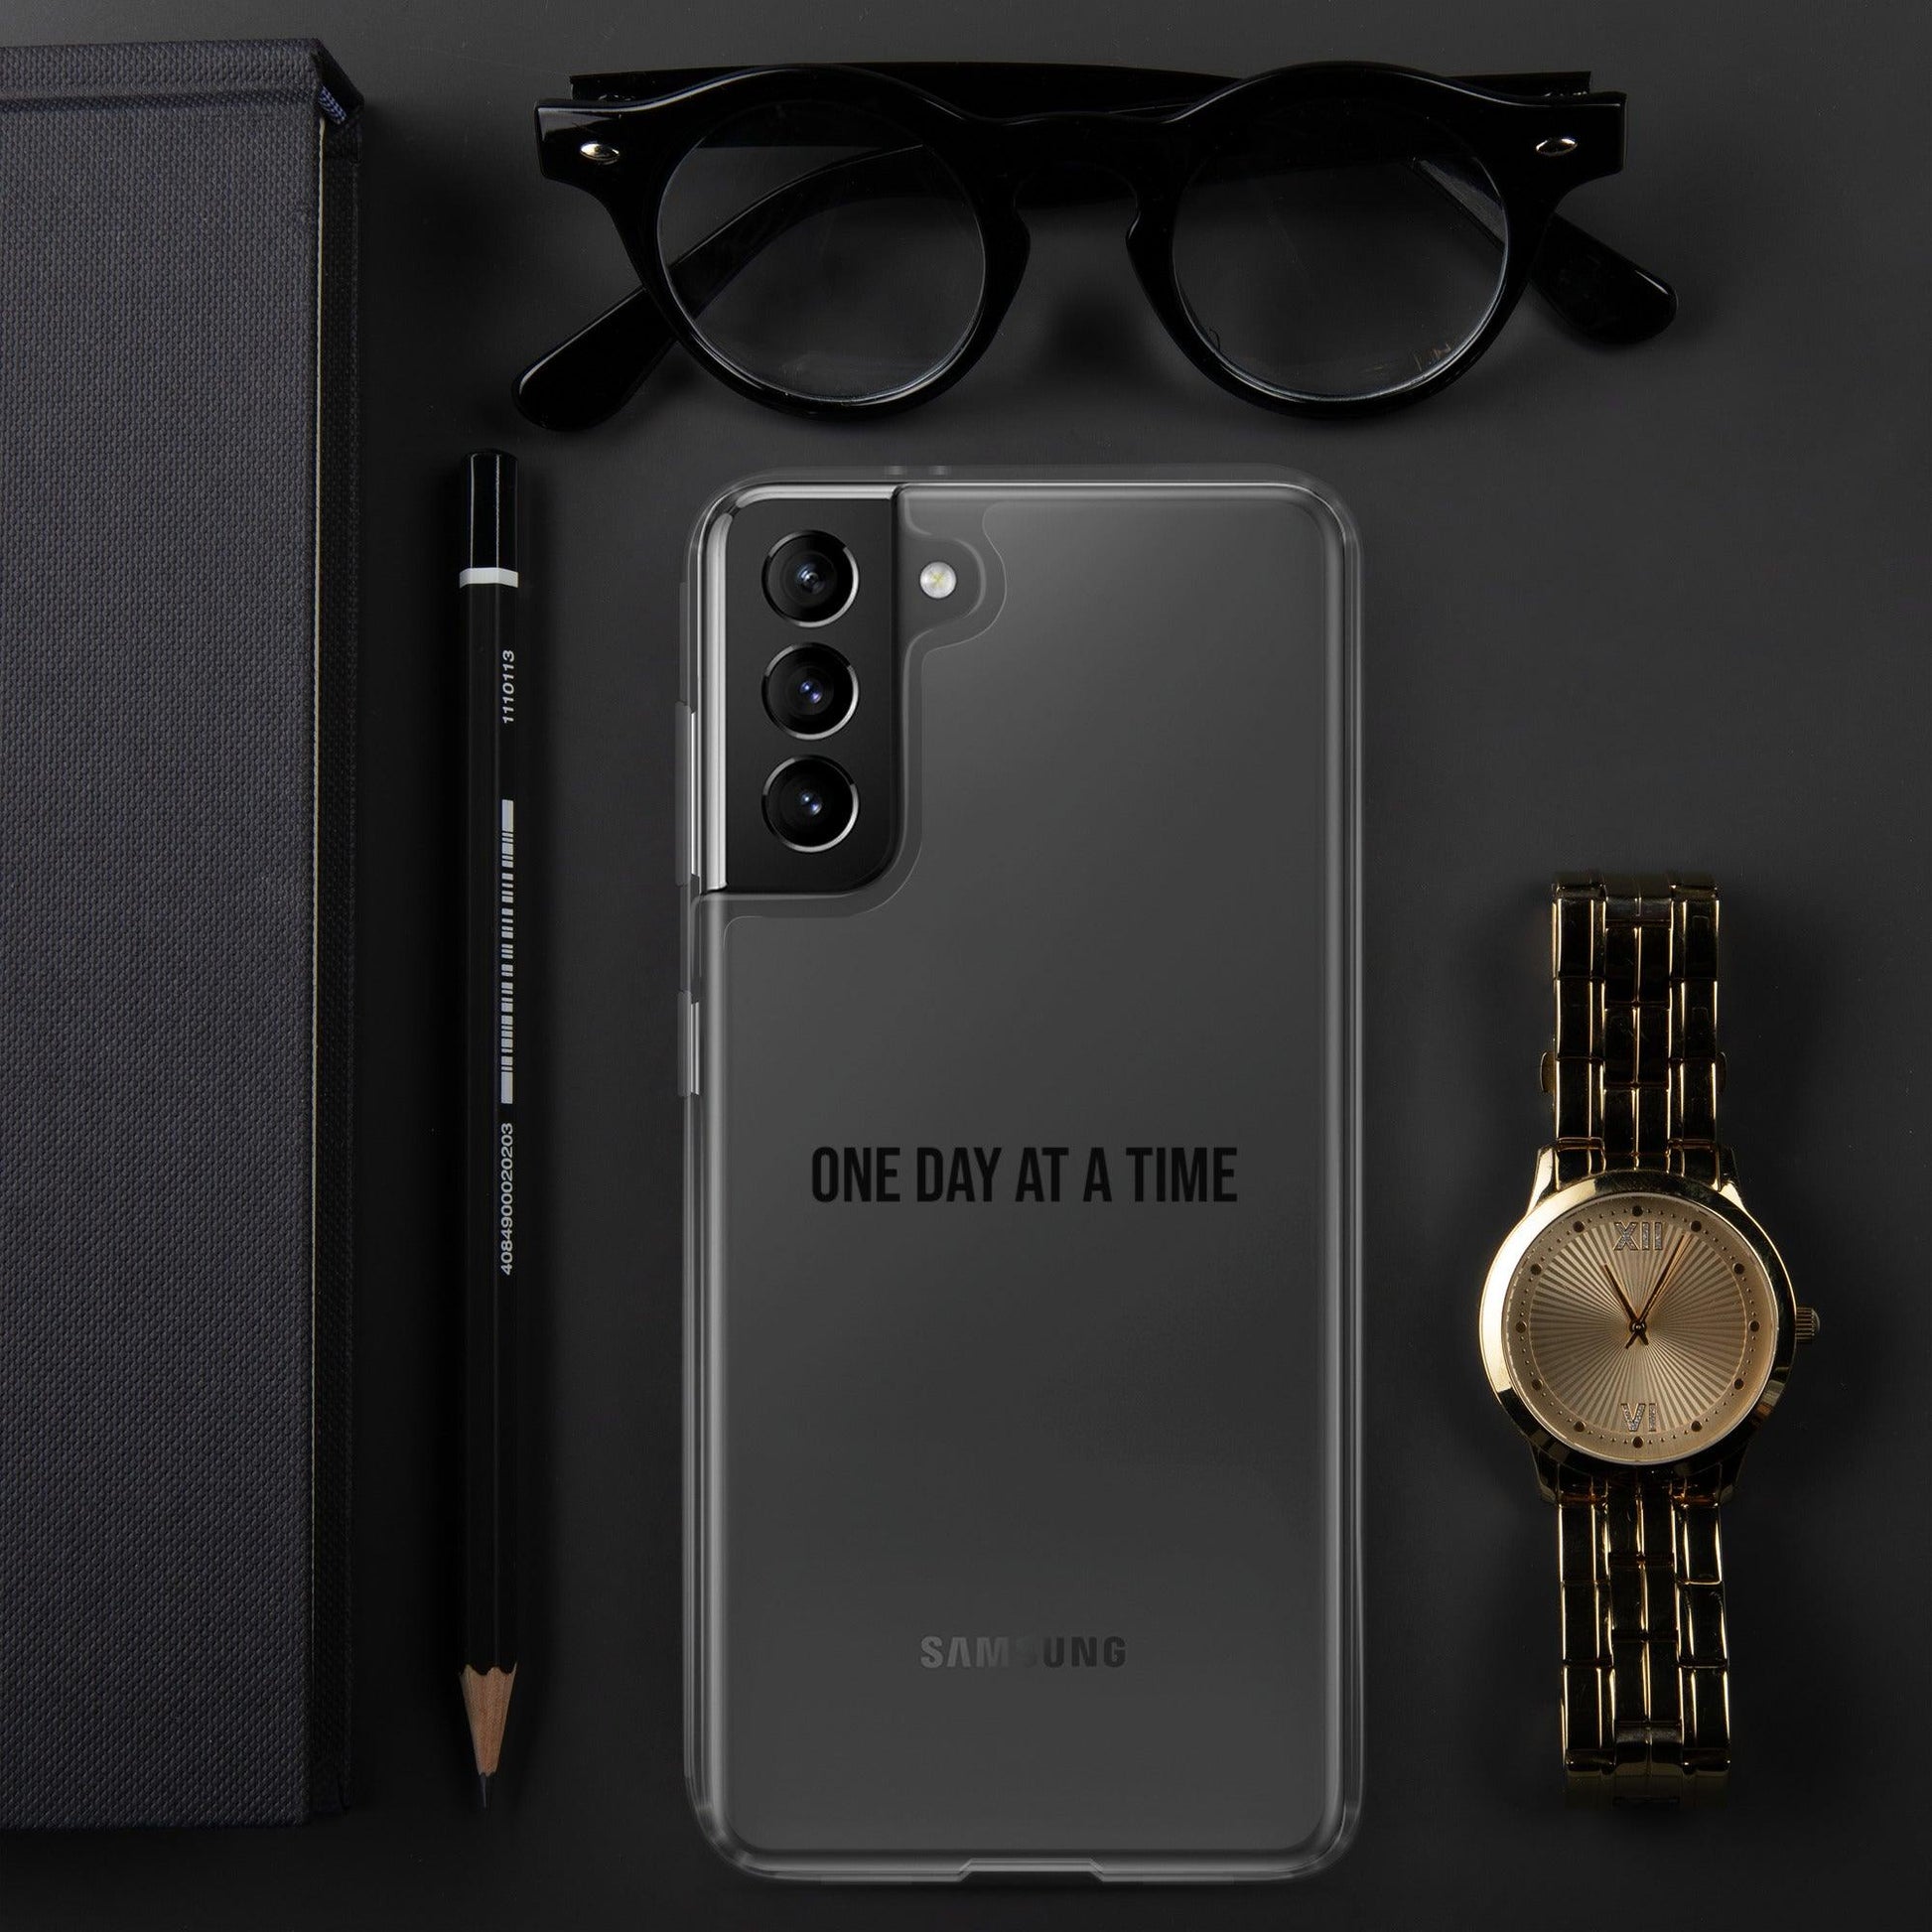 Samsung Case "One day at a time" - Clean & Sober